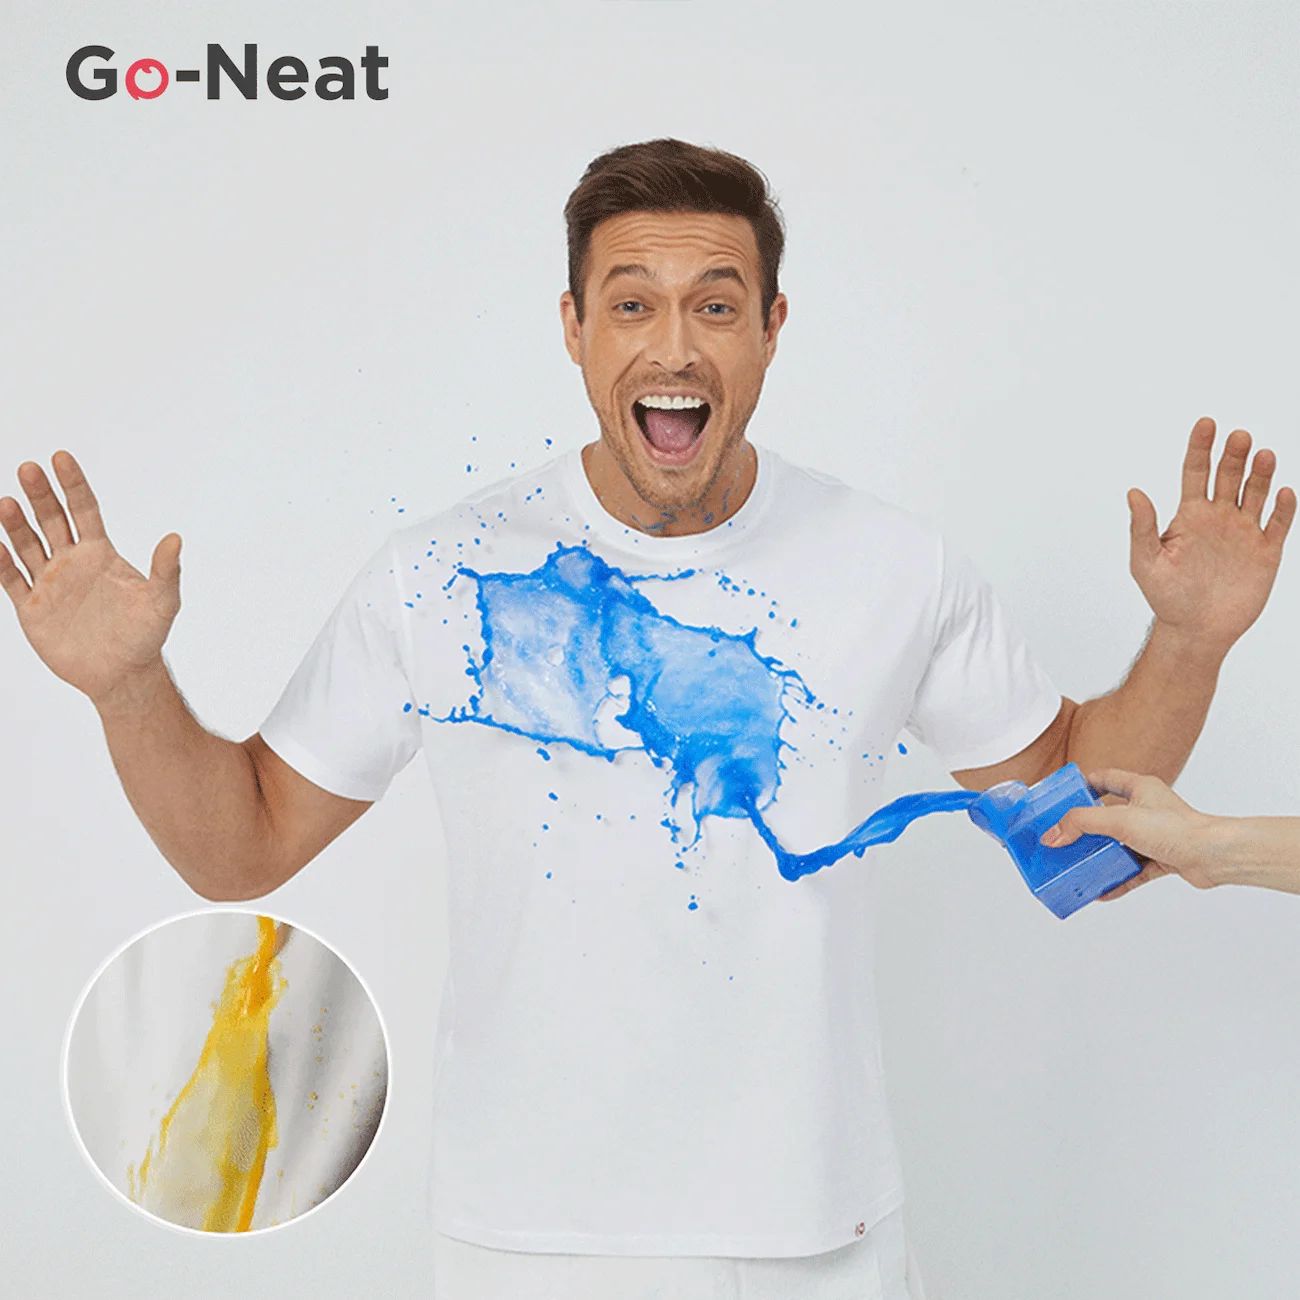 Go-Neat Water Repellent and Stain Resistant T-Shirts for Men | PatPat